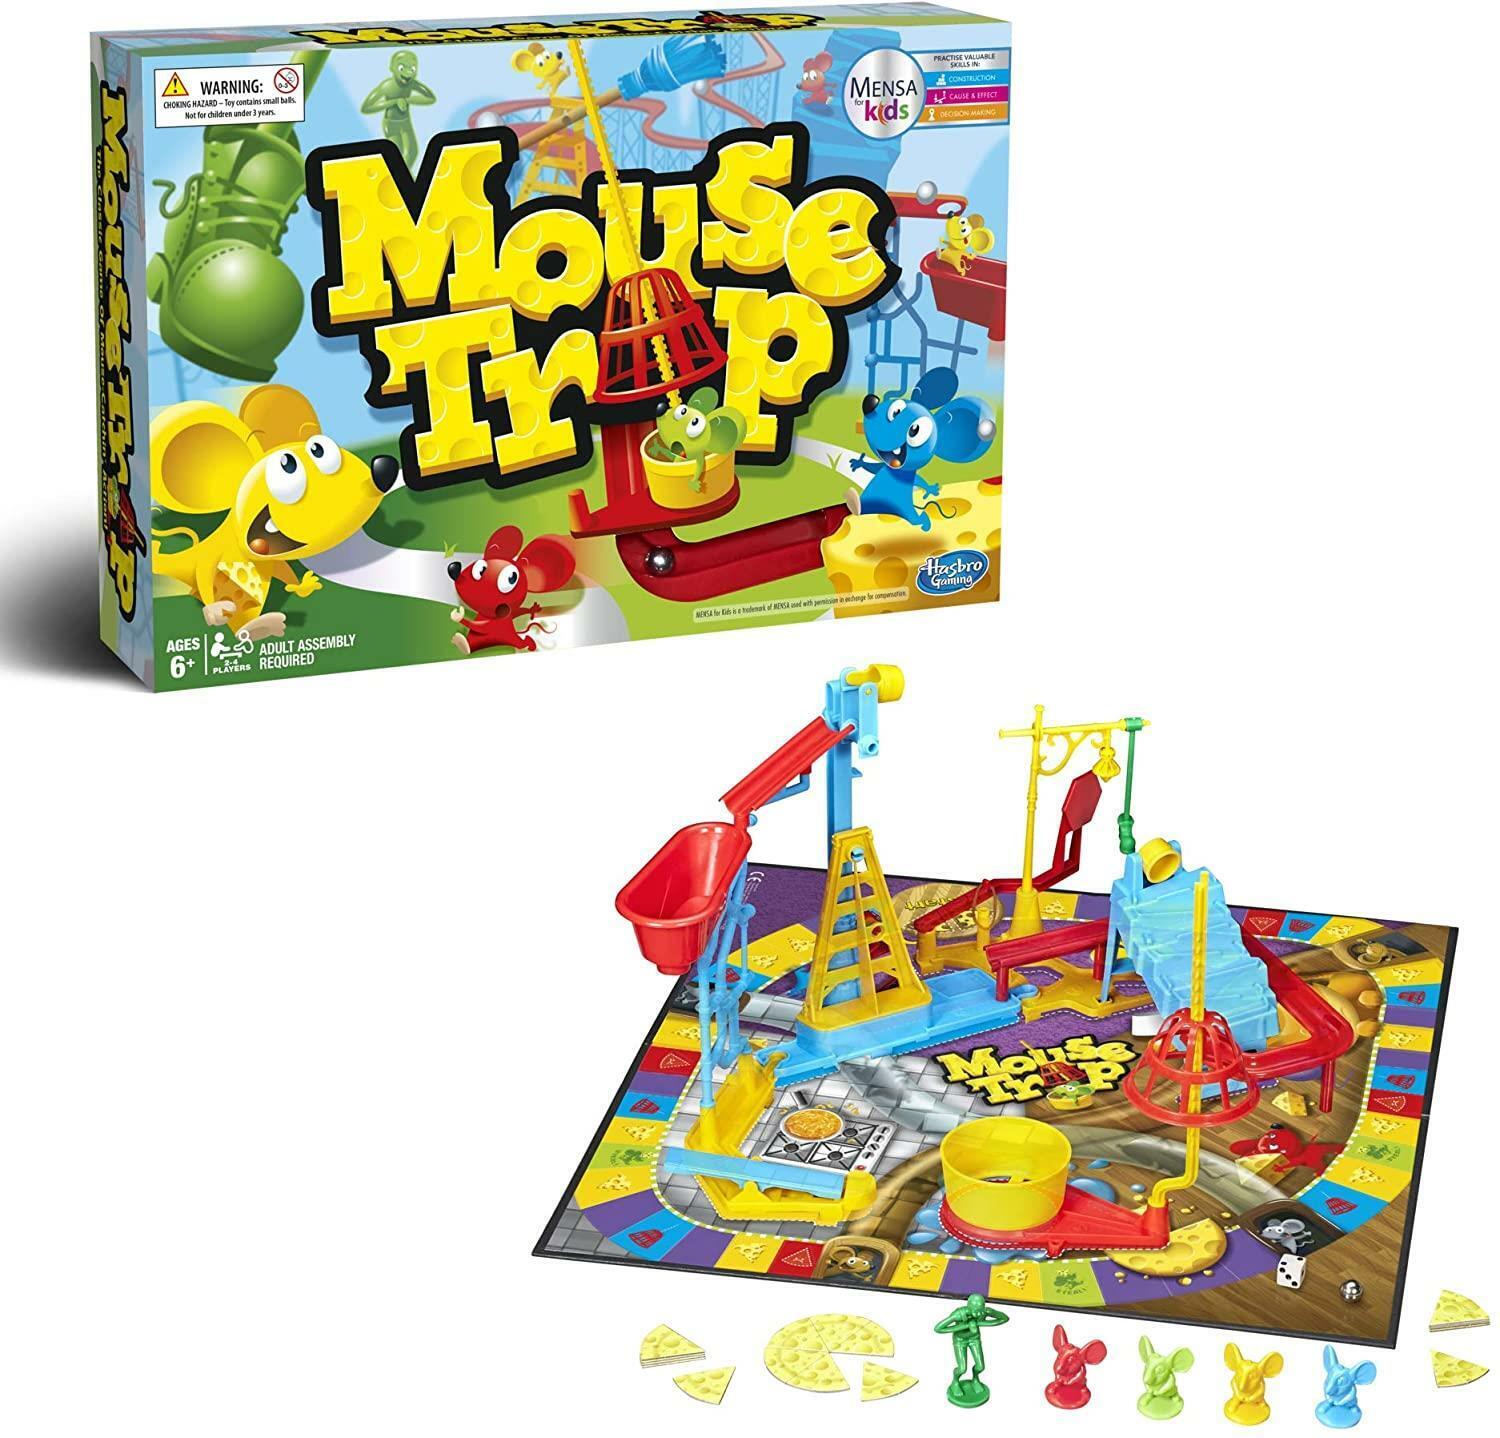 https://static.wikia.nocookie.net/board-games-galore/images/8/84/MouseTrap_BoardGame.jpg/revision/latest?cb=20221218062557